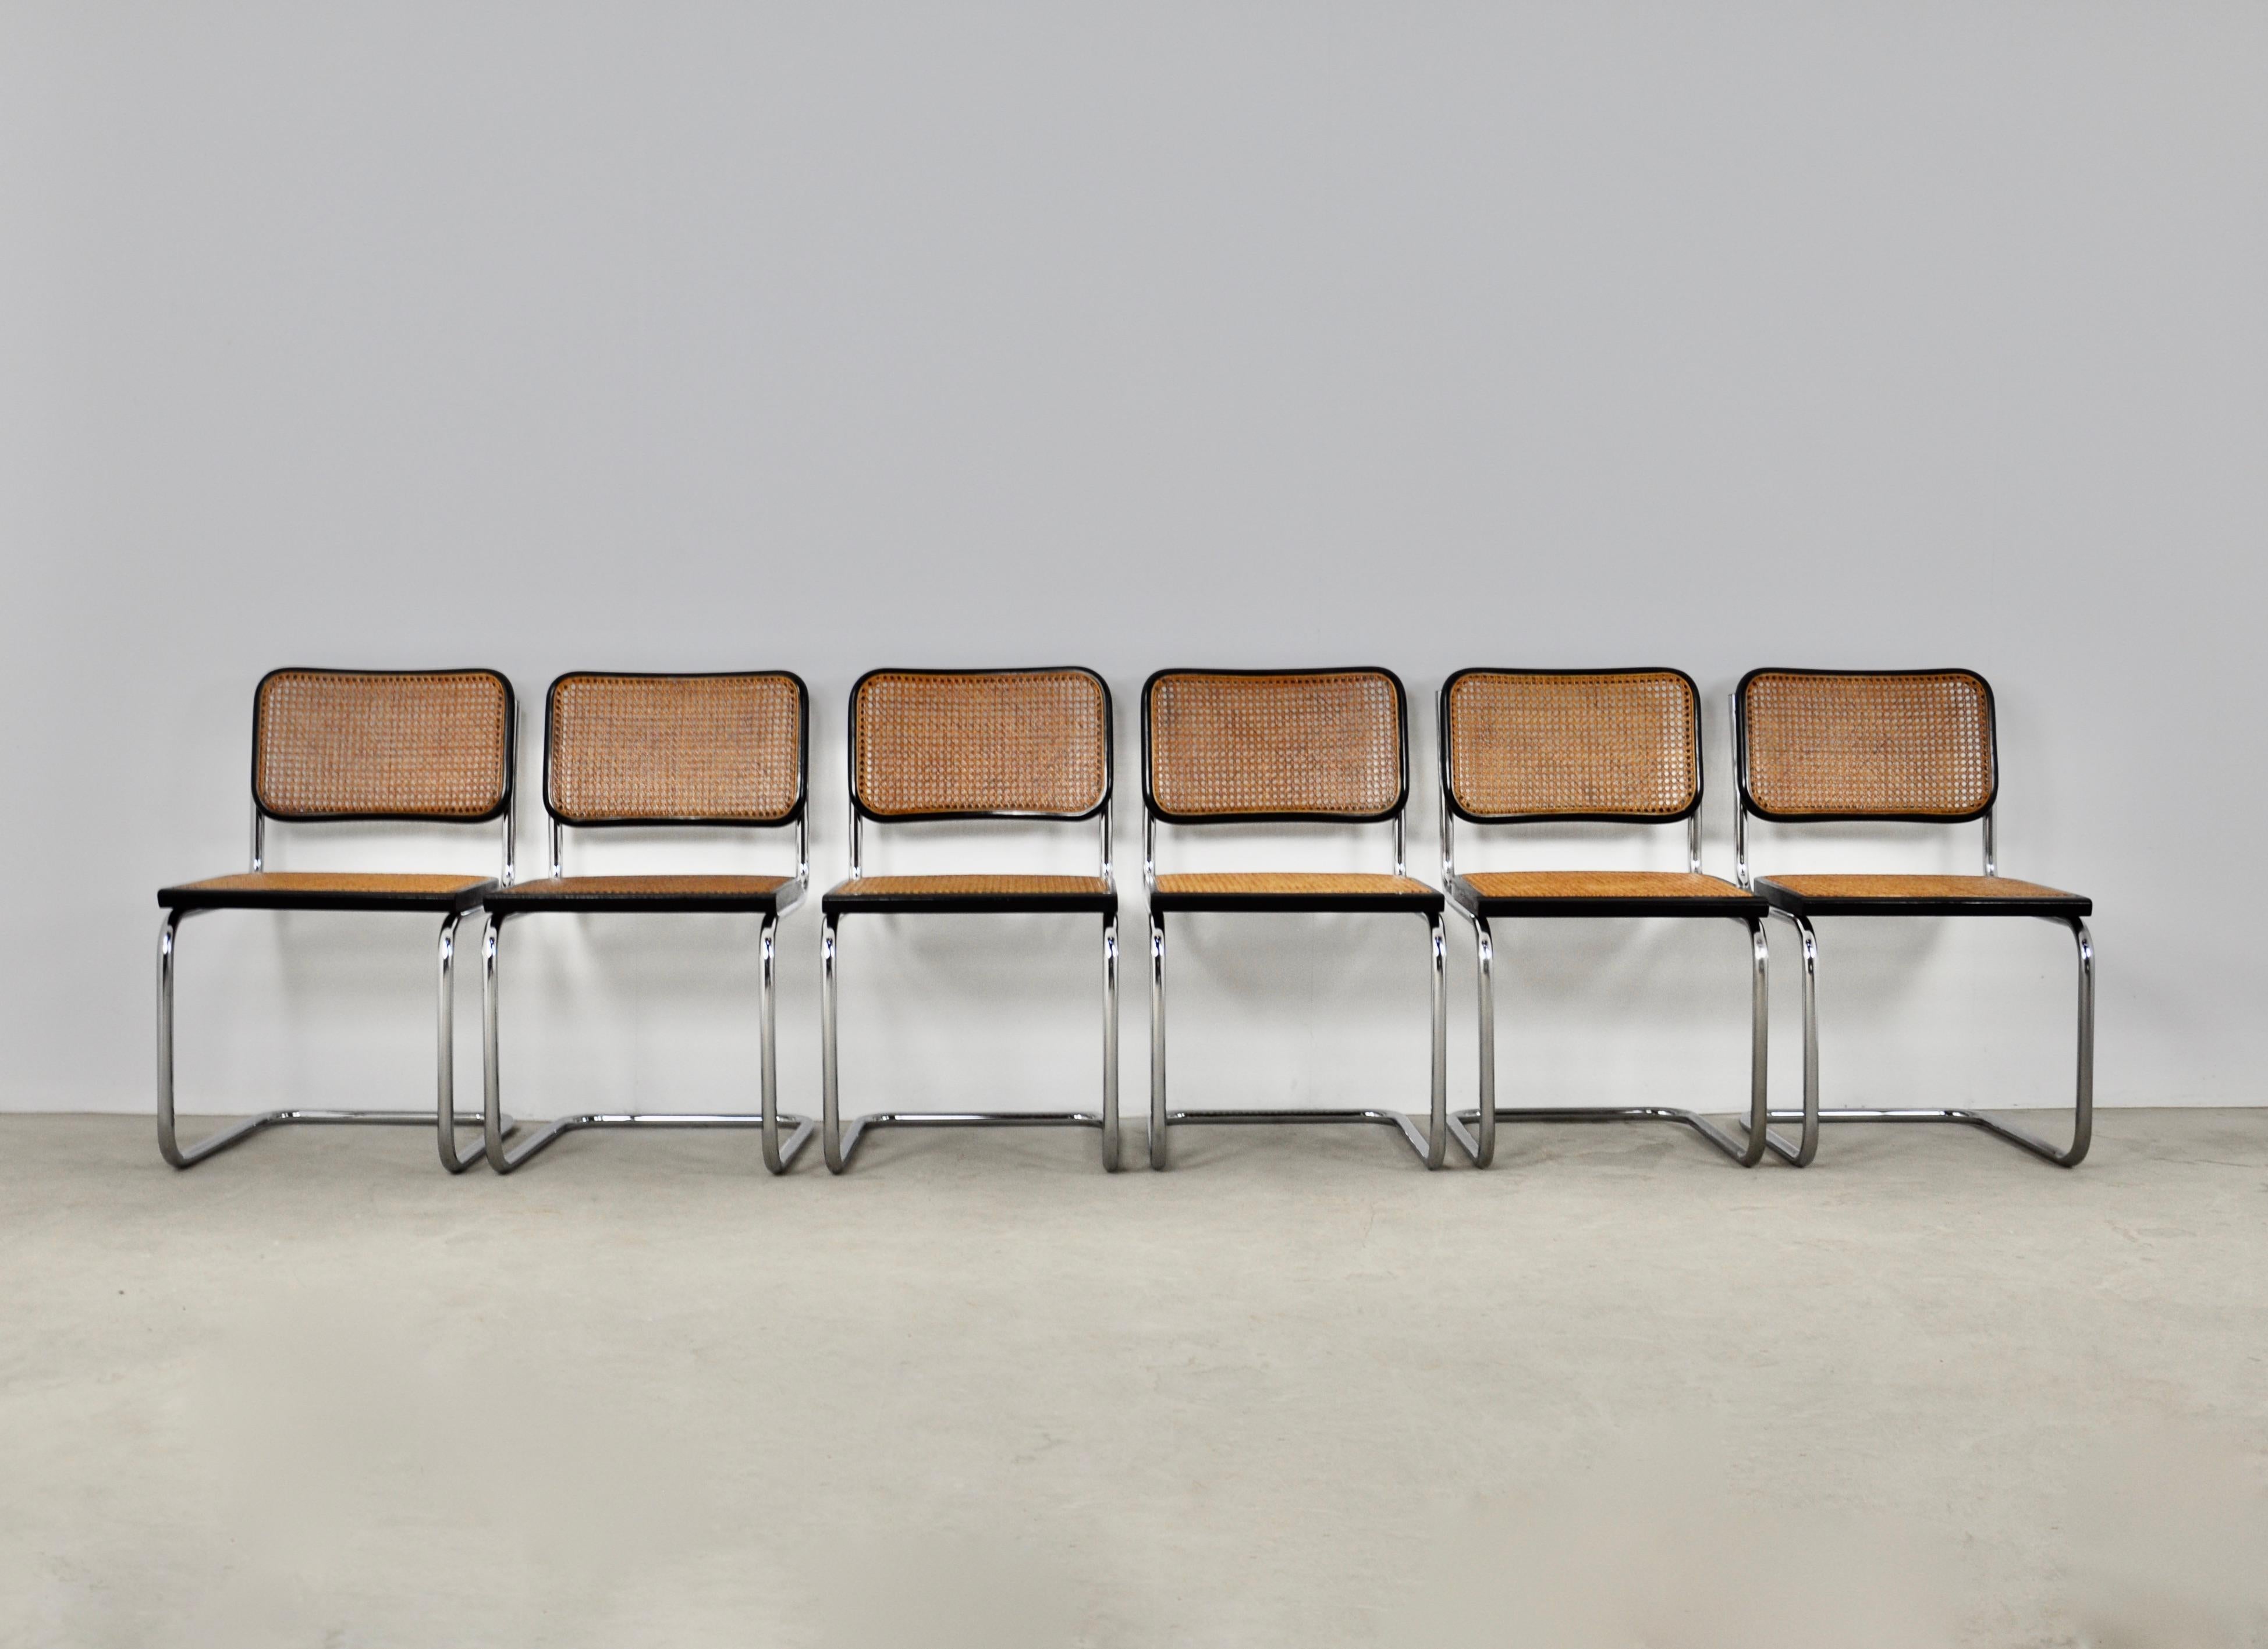 Set of 6 chairs in metal, wood and cane. Wear due to time and age of the chairs (see photo) 
Measure: Seat height: 46cm.